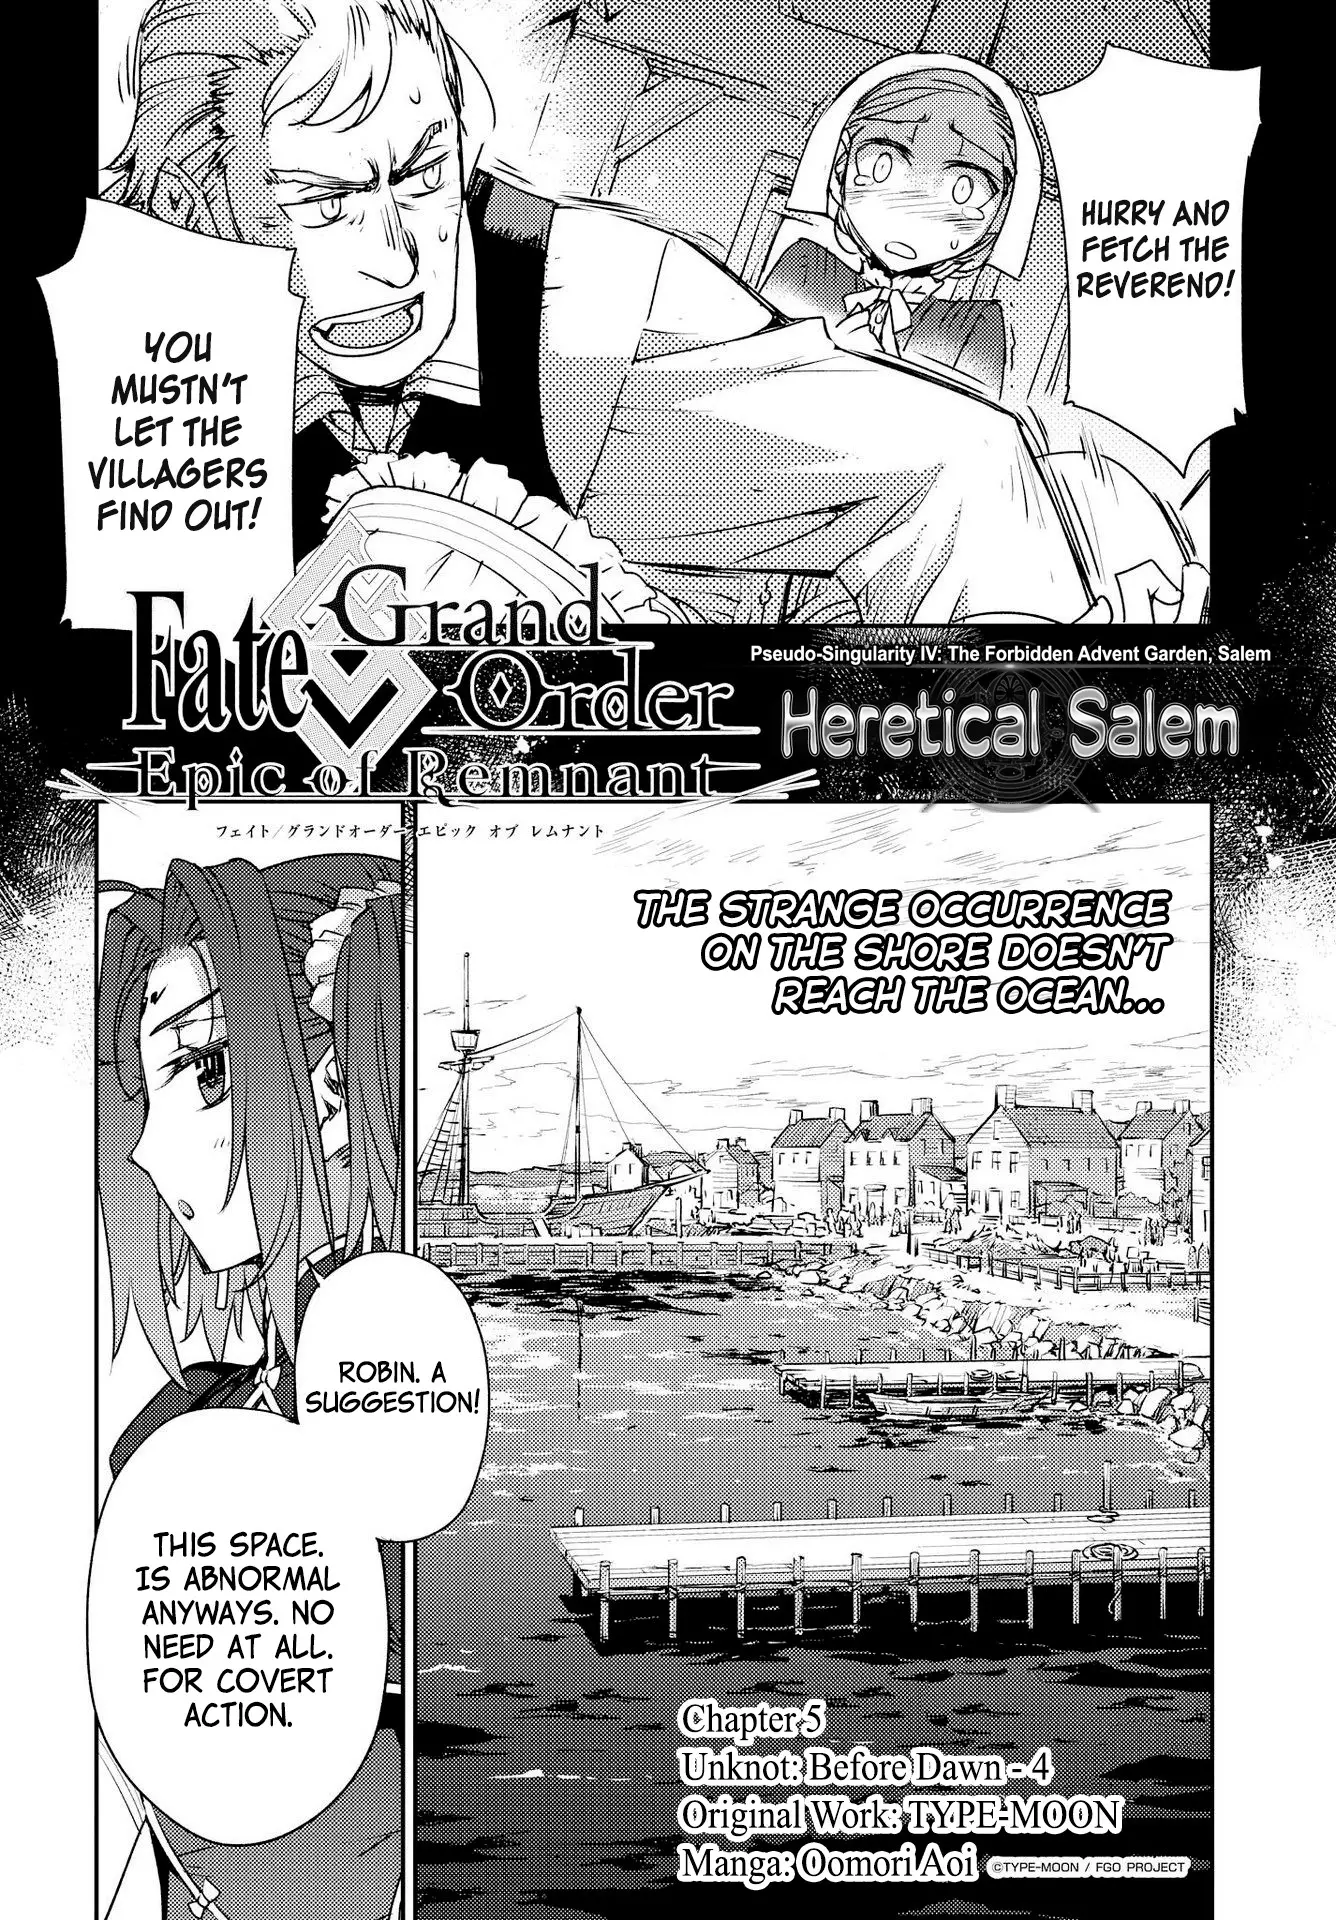 Fate/grand Order: Epic Of Remnant - Subspecies Singularity Iv: Taboo Advent Salem: Salem Of Heresy - 5 page 2